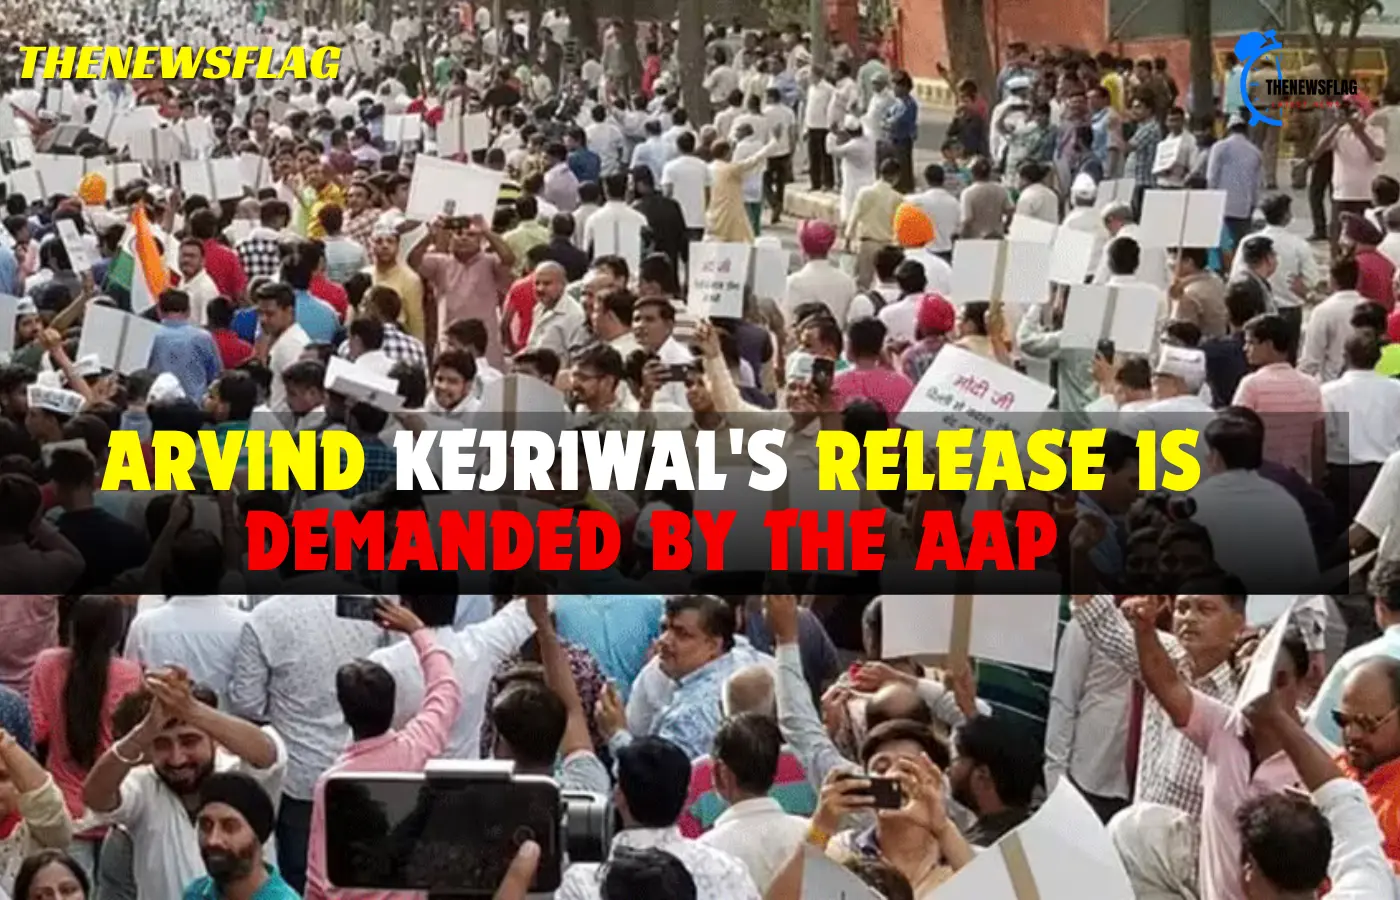 Arvind Kejriwal's release is demanded by the AAP, while the BJP demands his resignation.